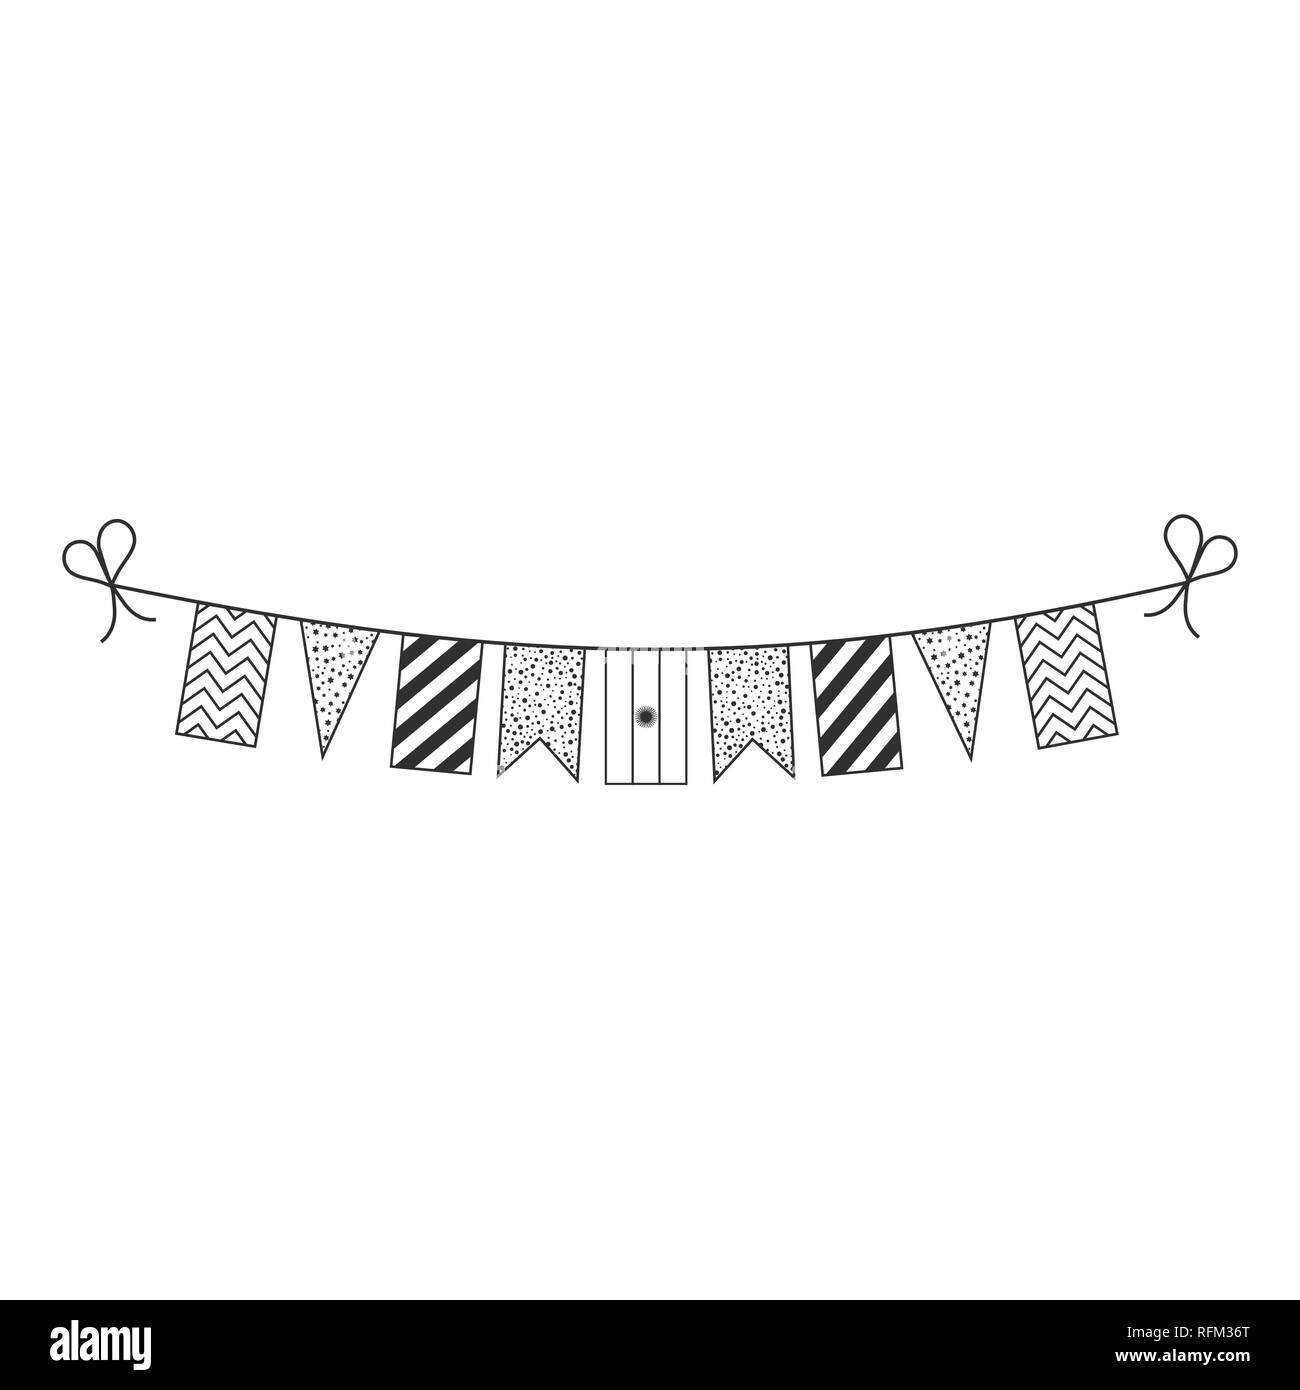 Decorations bunting flags for Argentina national day holiday in black outline flat design. Independence day or National day holiday concept. Stock Vector